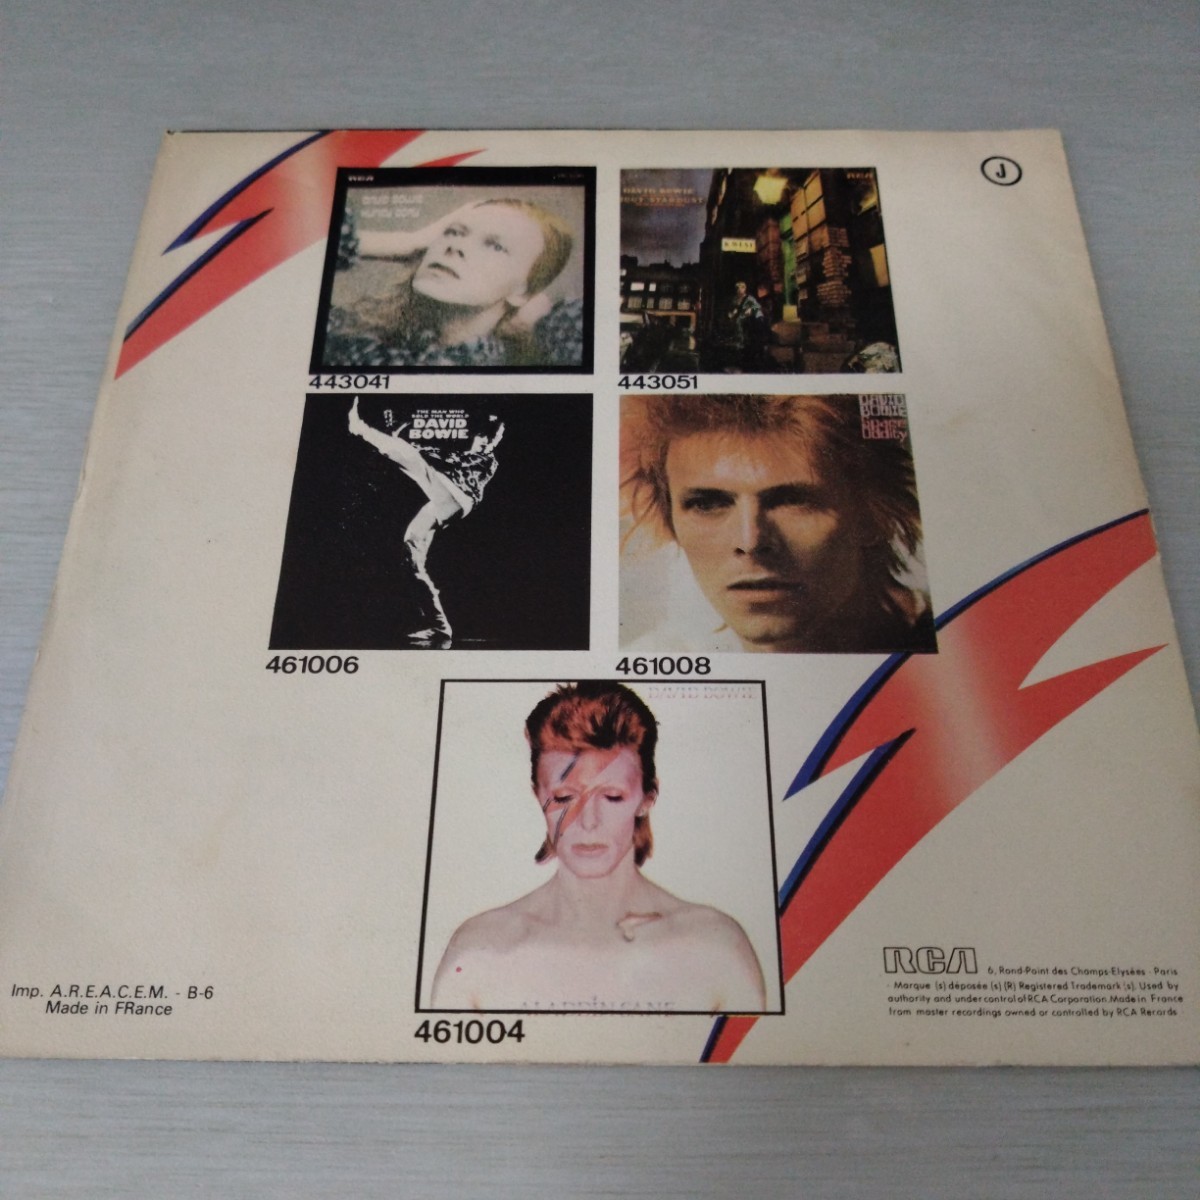  France record single record DAVID BOWIE / LIFE ON MARS David * bow iFRANCE orig.